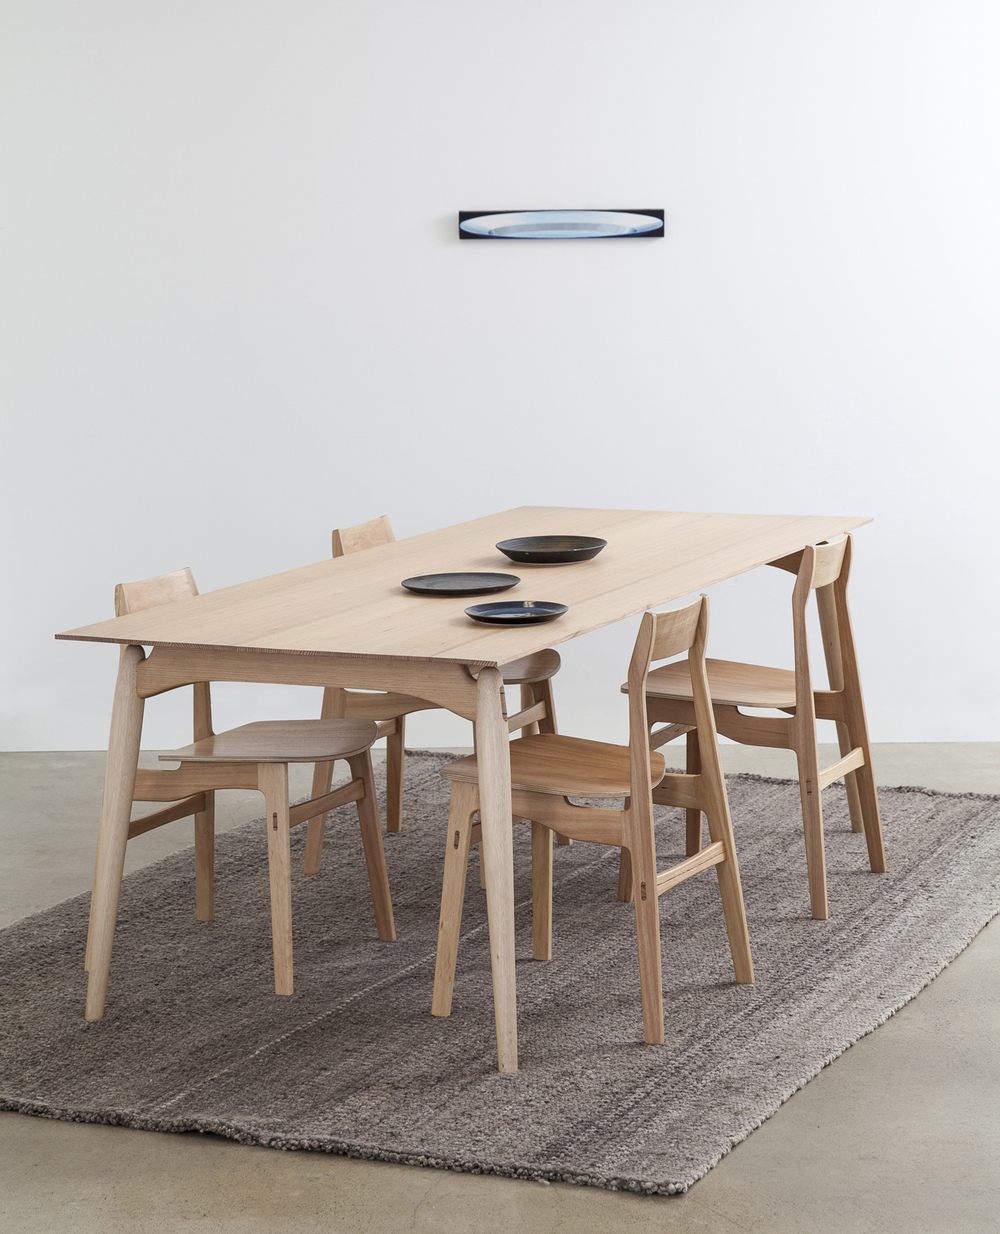 Flea Dining Chair by markowitzdesign